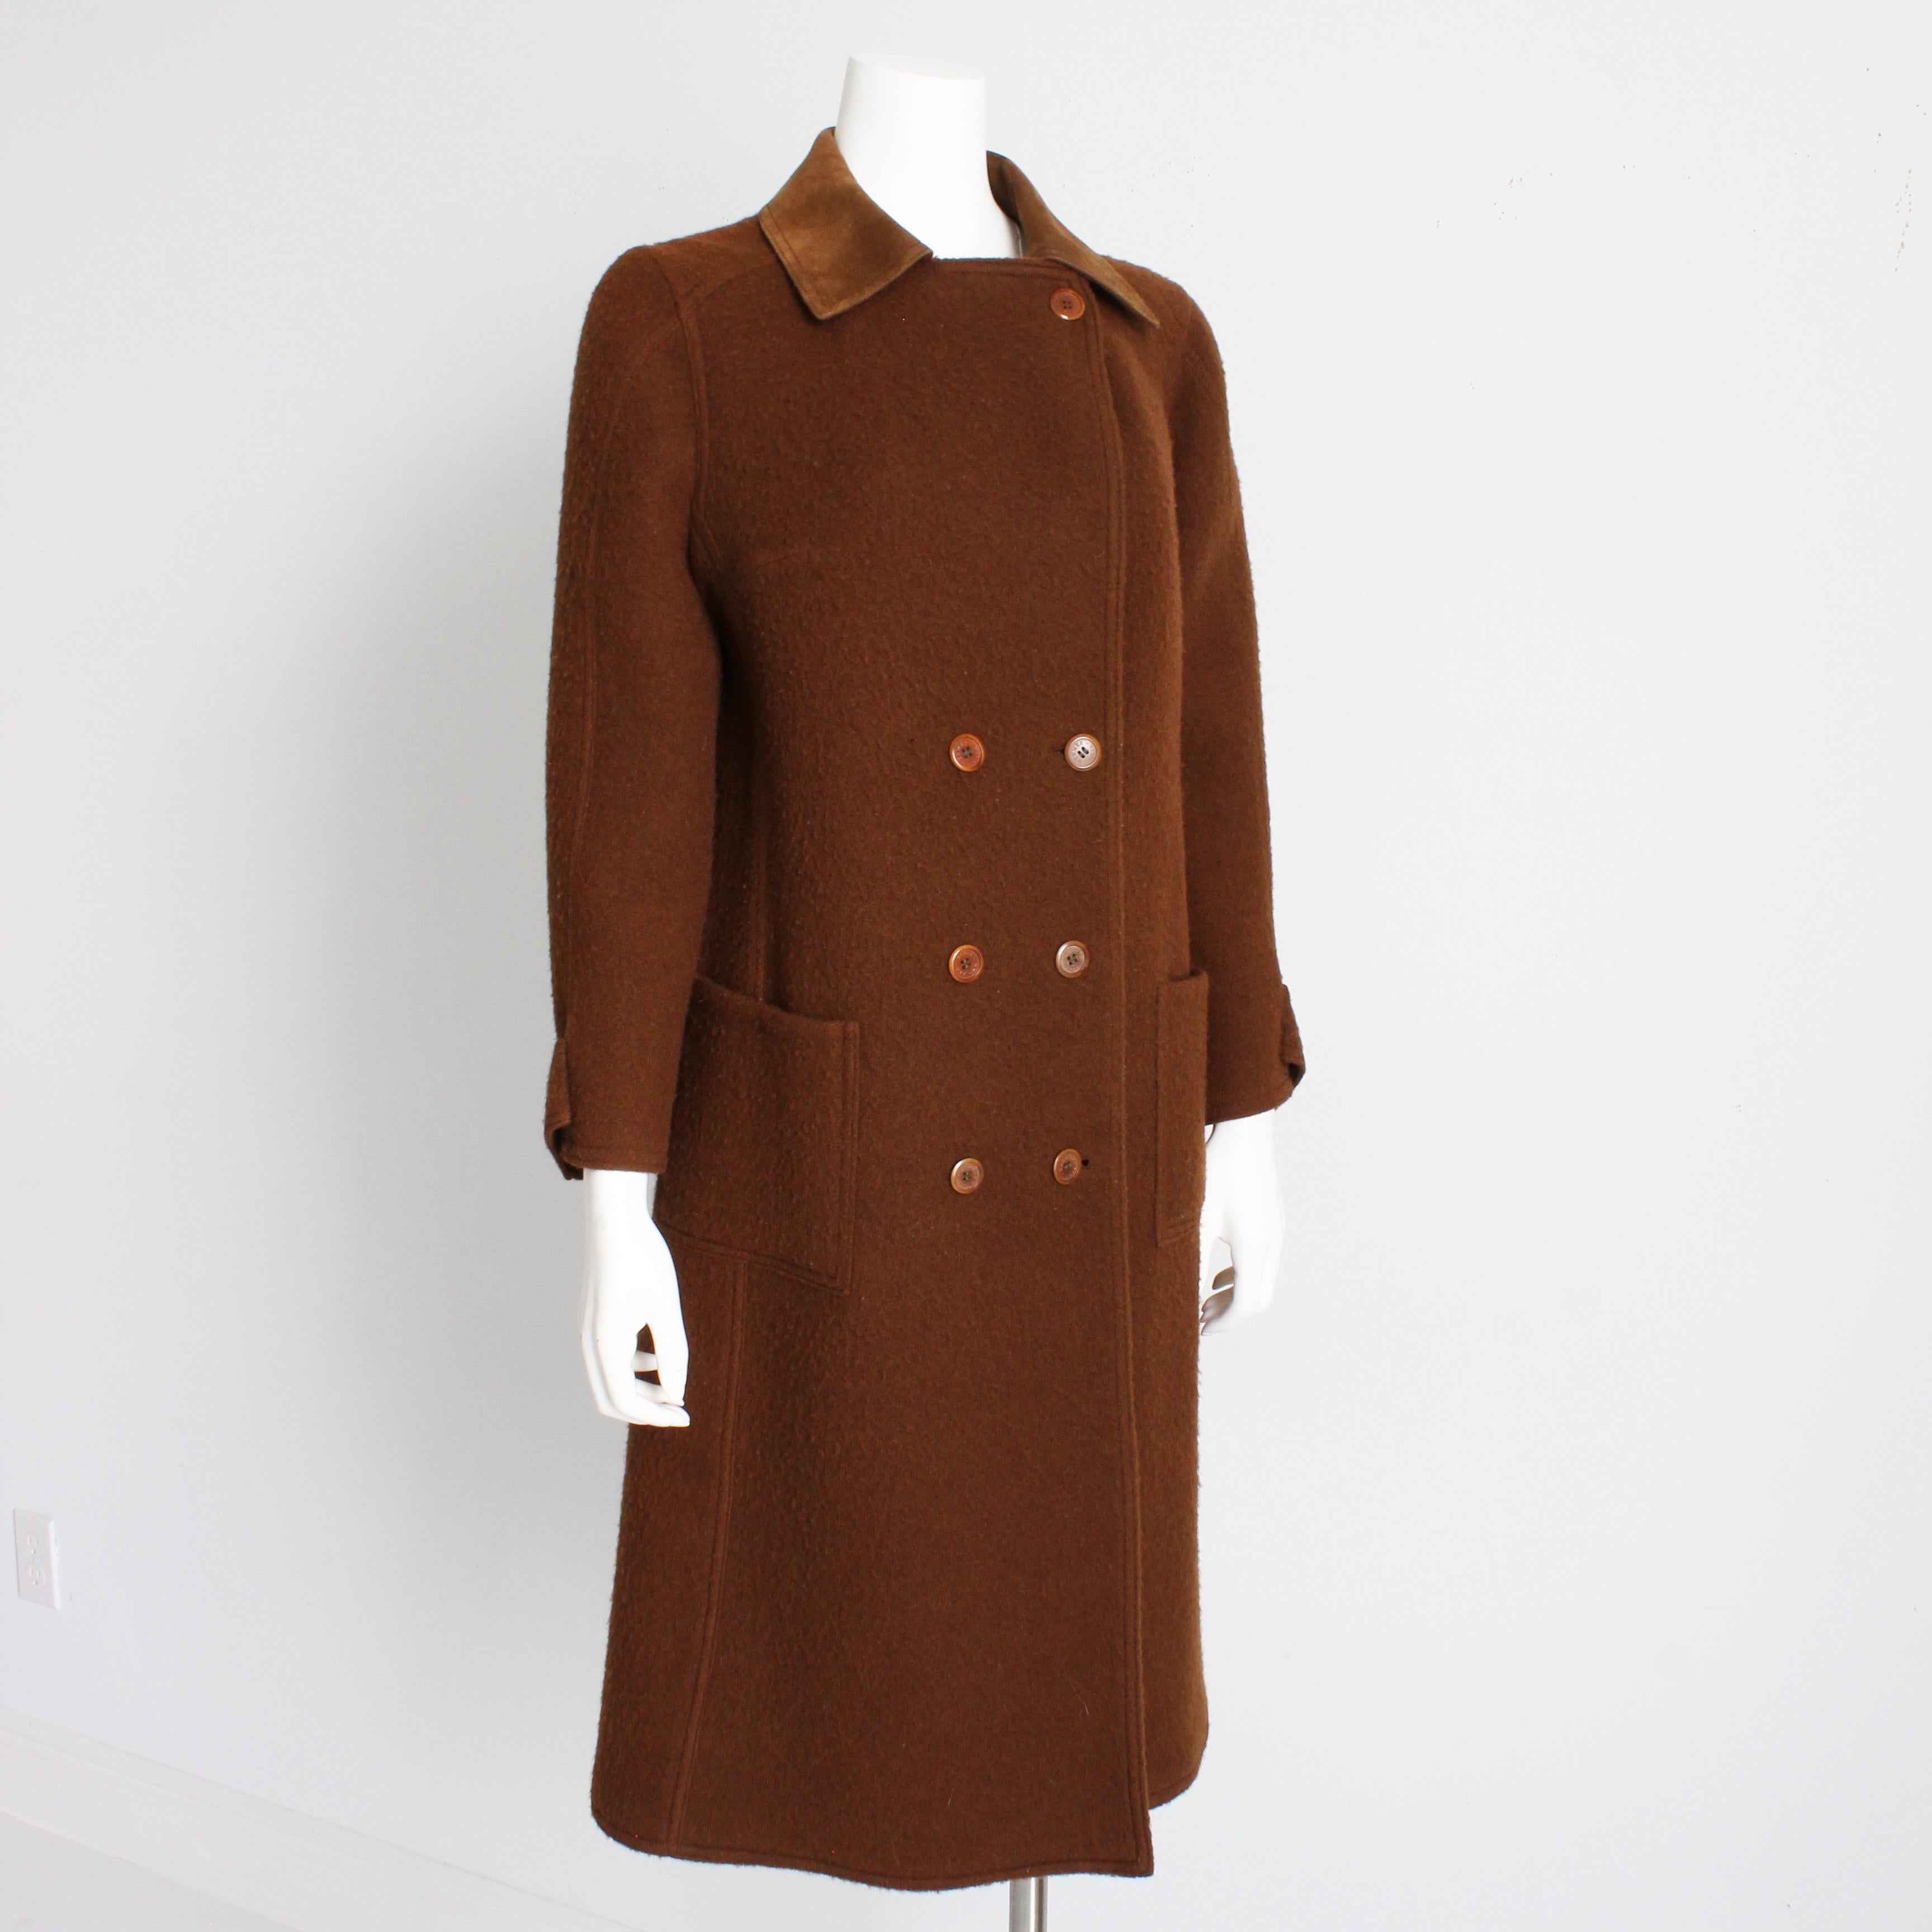 Hermes Brown Double Breasted Suede Leather Trim Trench Style Wool Coat, 1970s For Sale 1